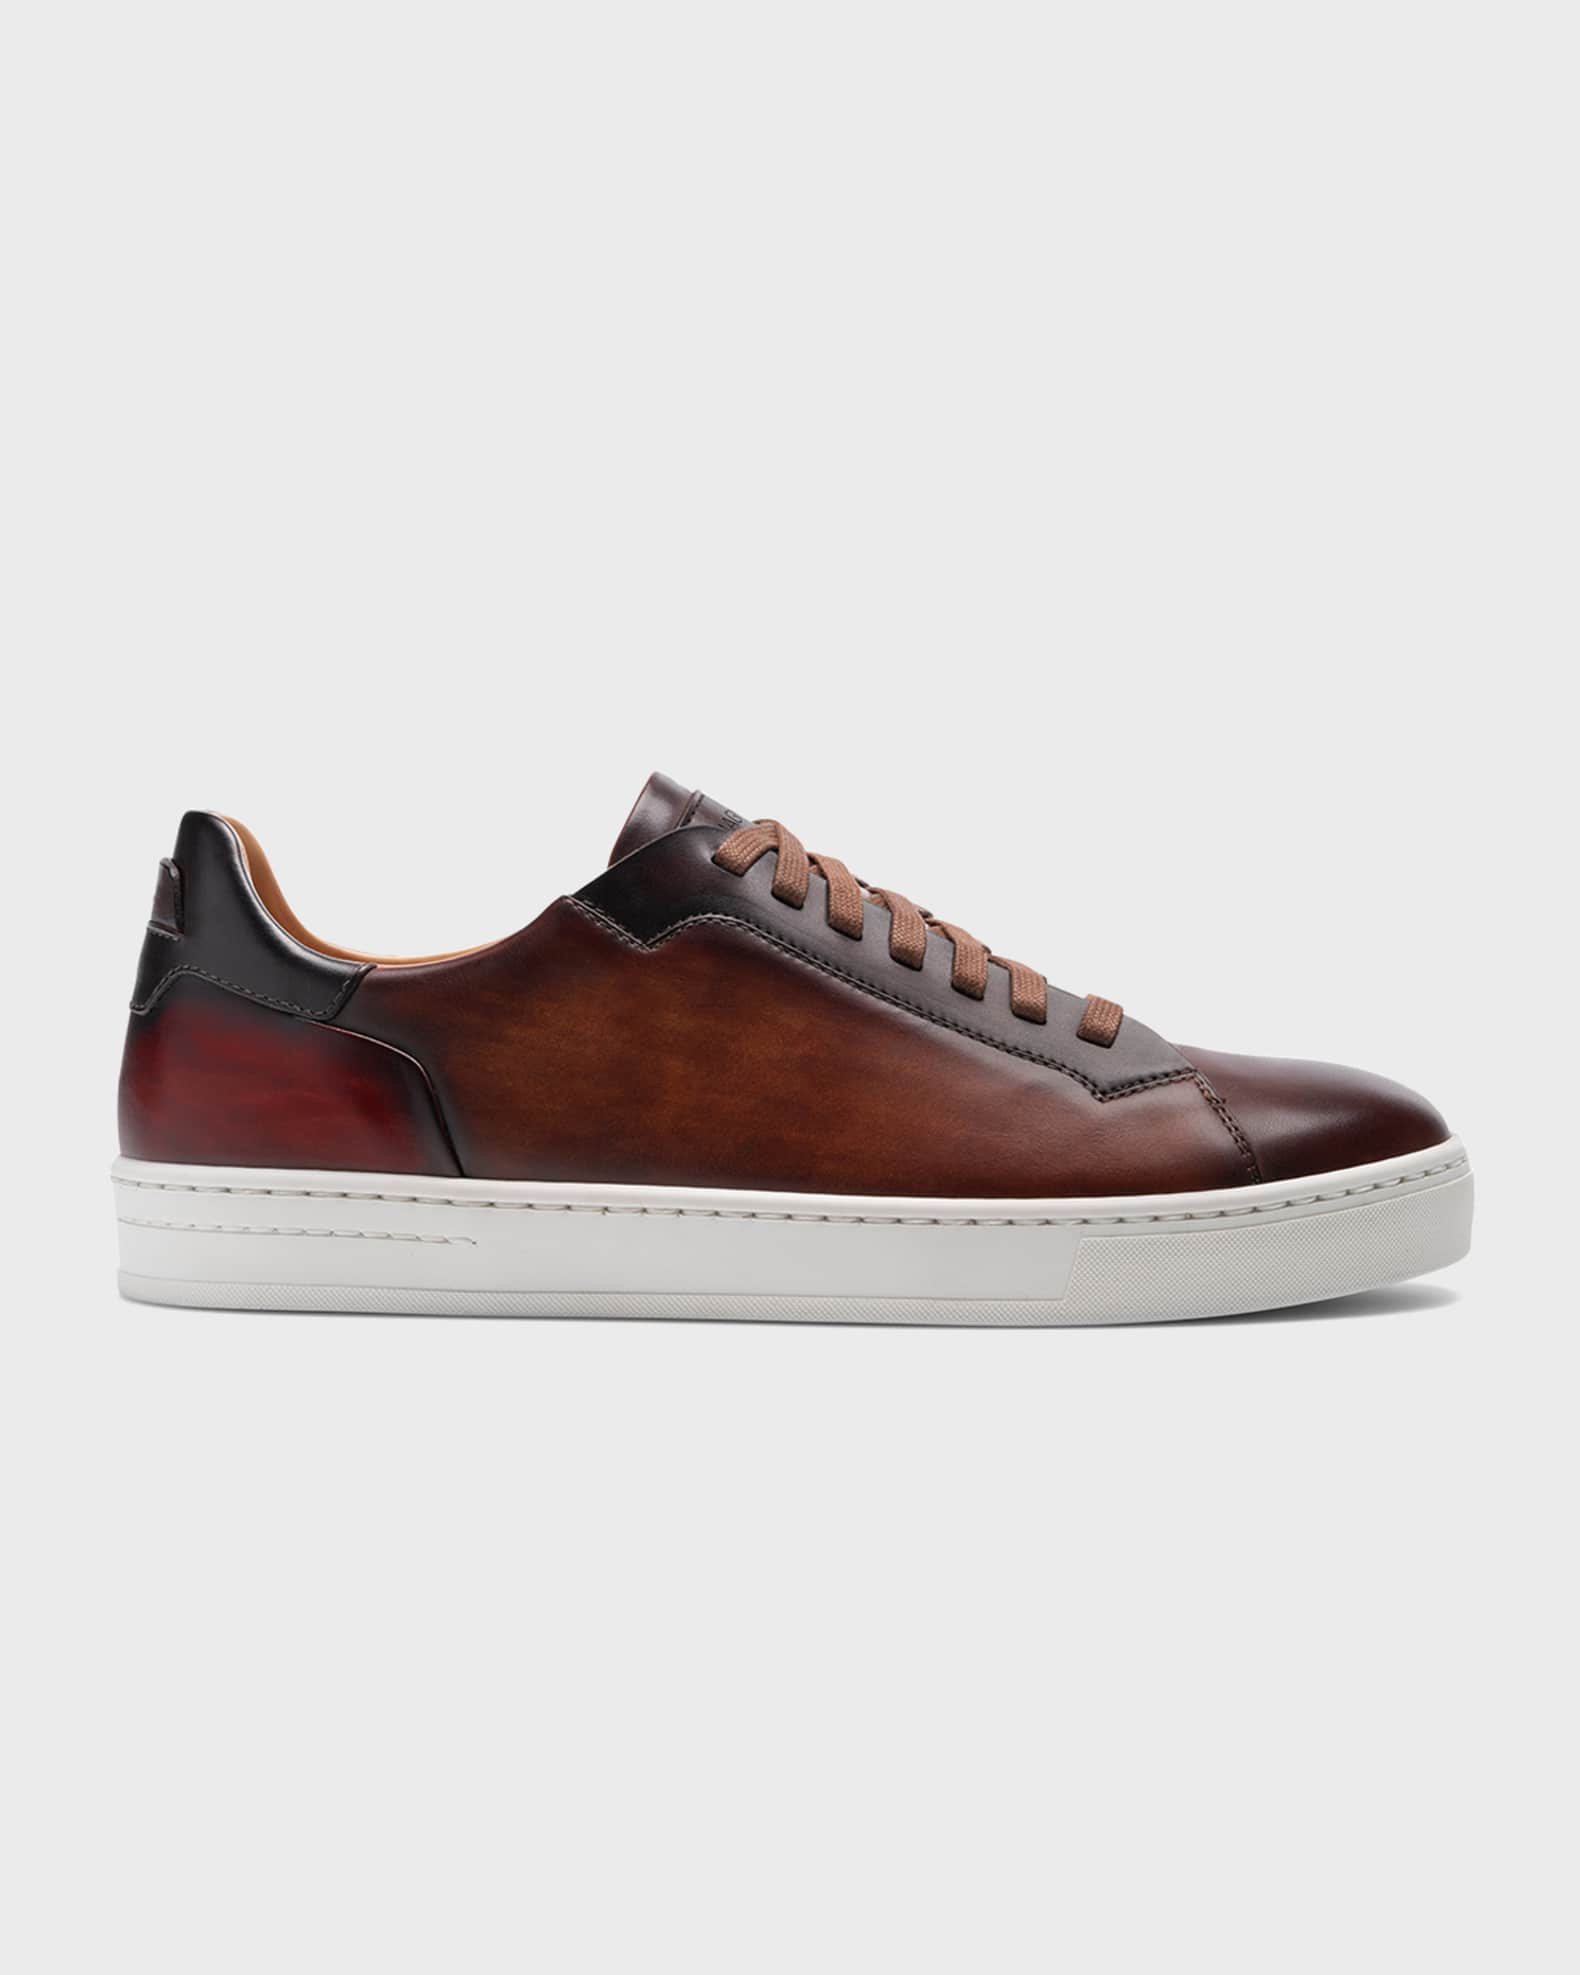 Magnanni Men's Amadeo Burnished Leather Low-Top Sneakers | Neiman Marcus